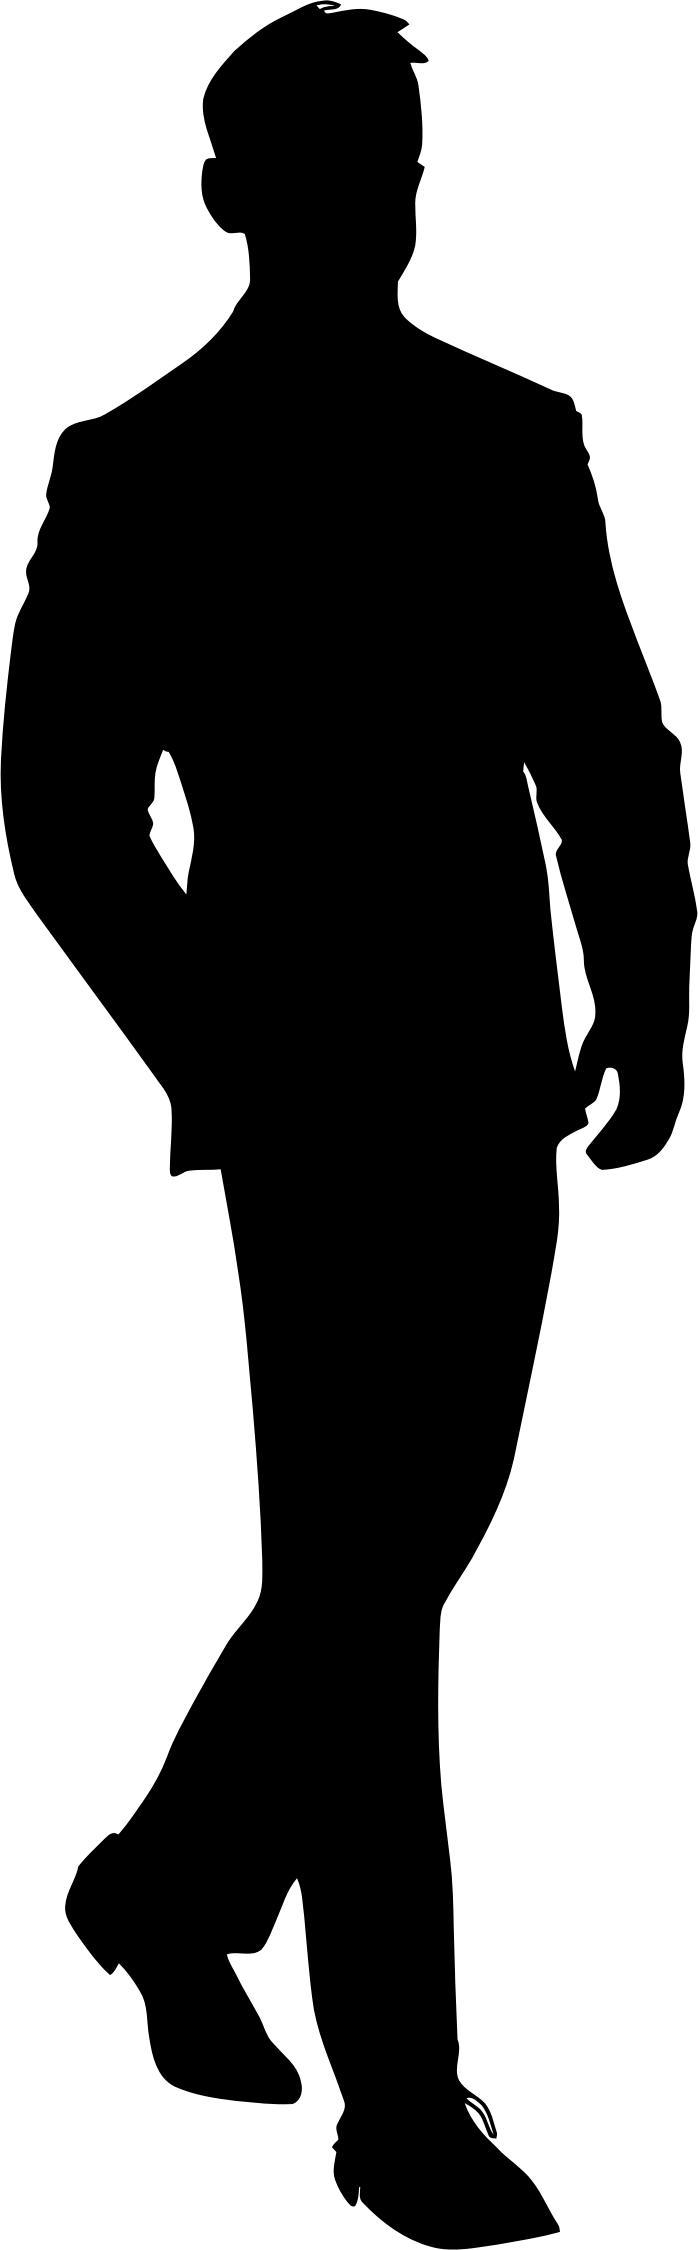 Man In Suit Silhouette png transparent